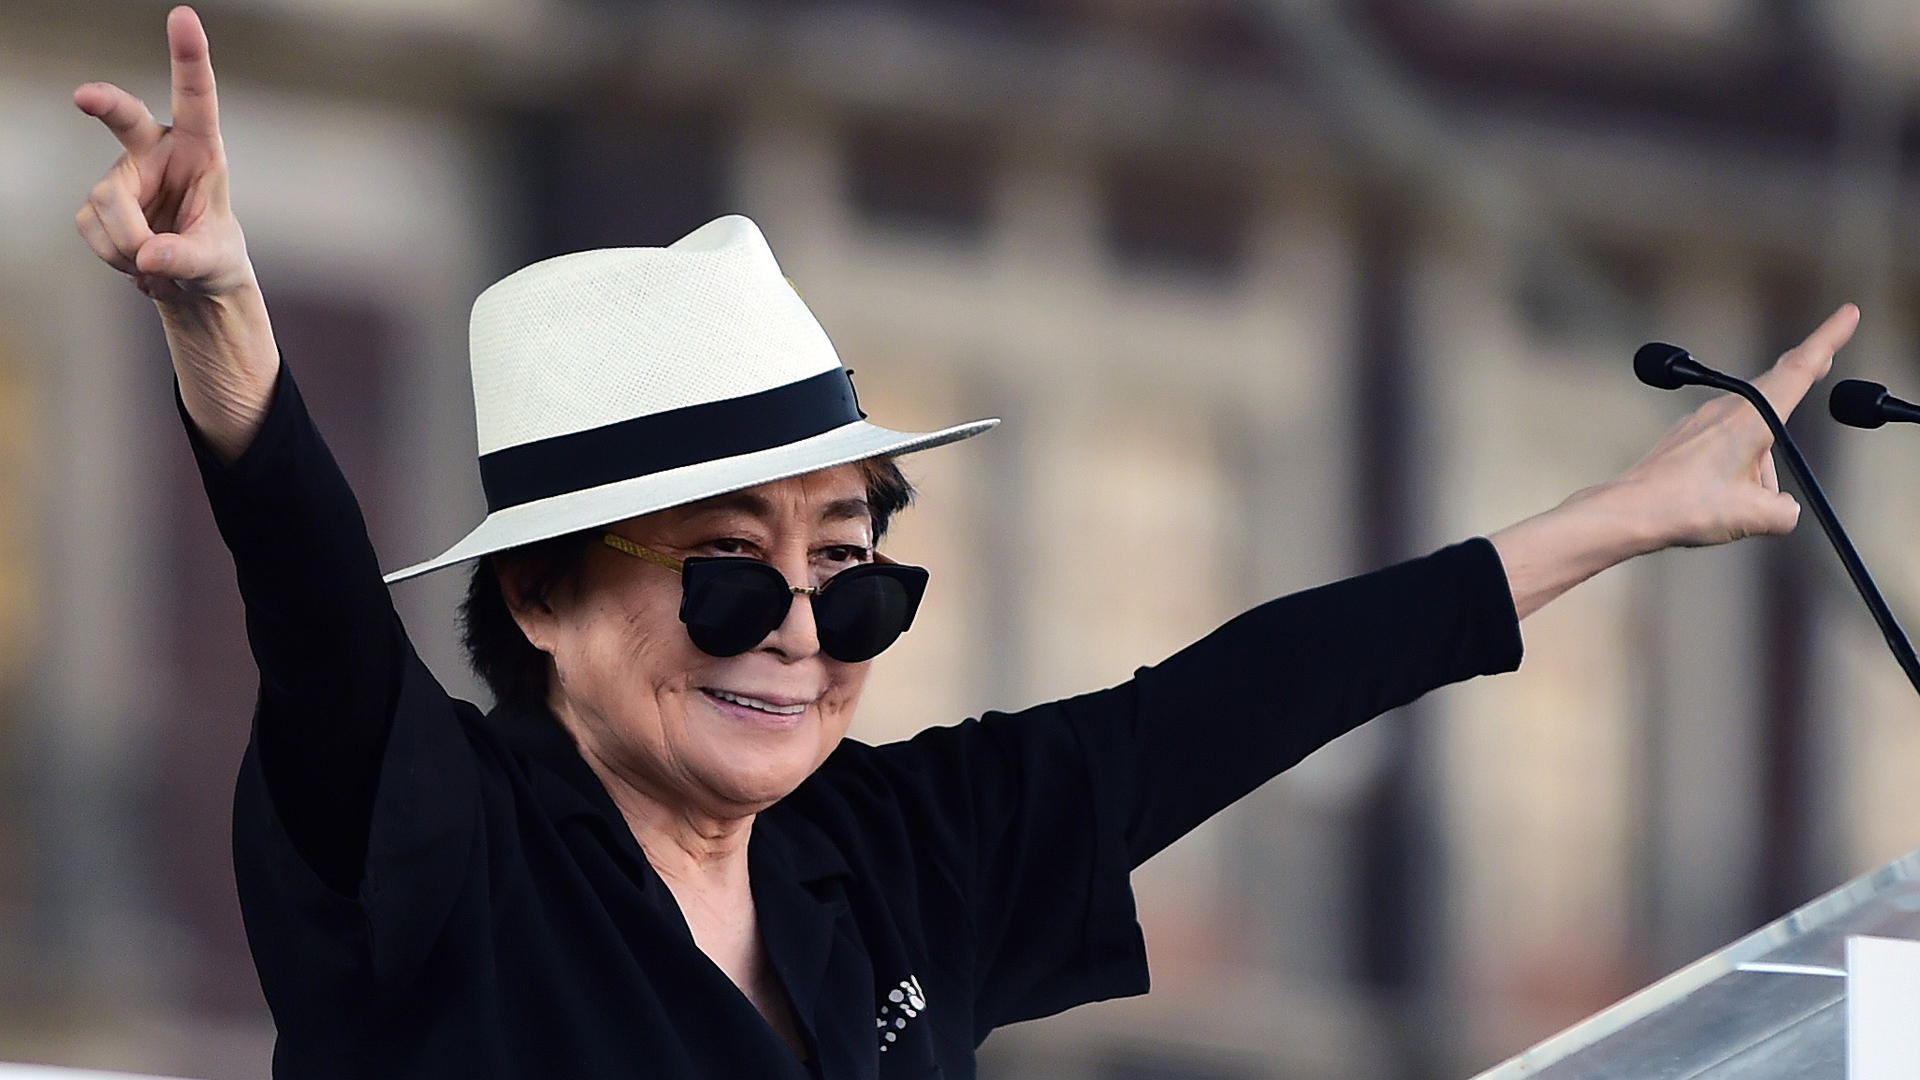 Yoko Ono Returns Home After Being Hospitalized With the Flu, Son Says